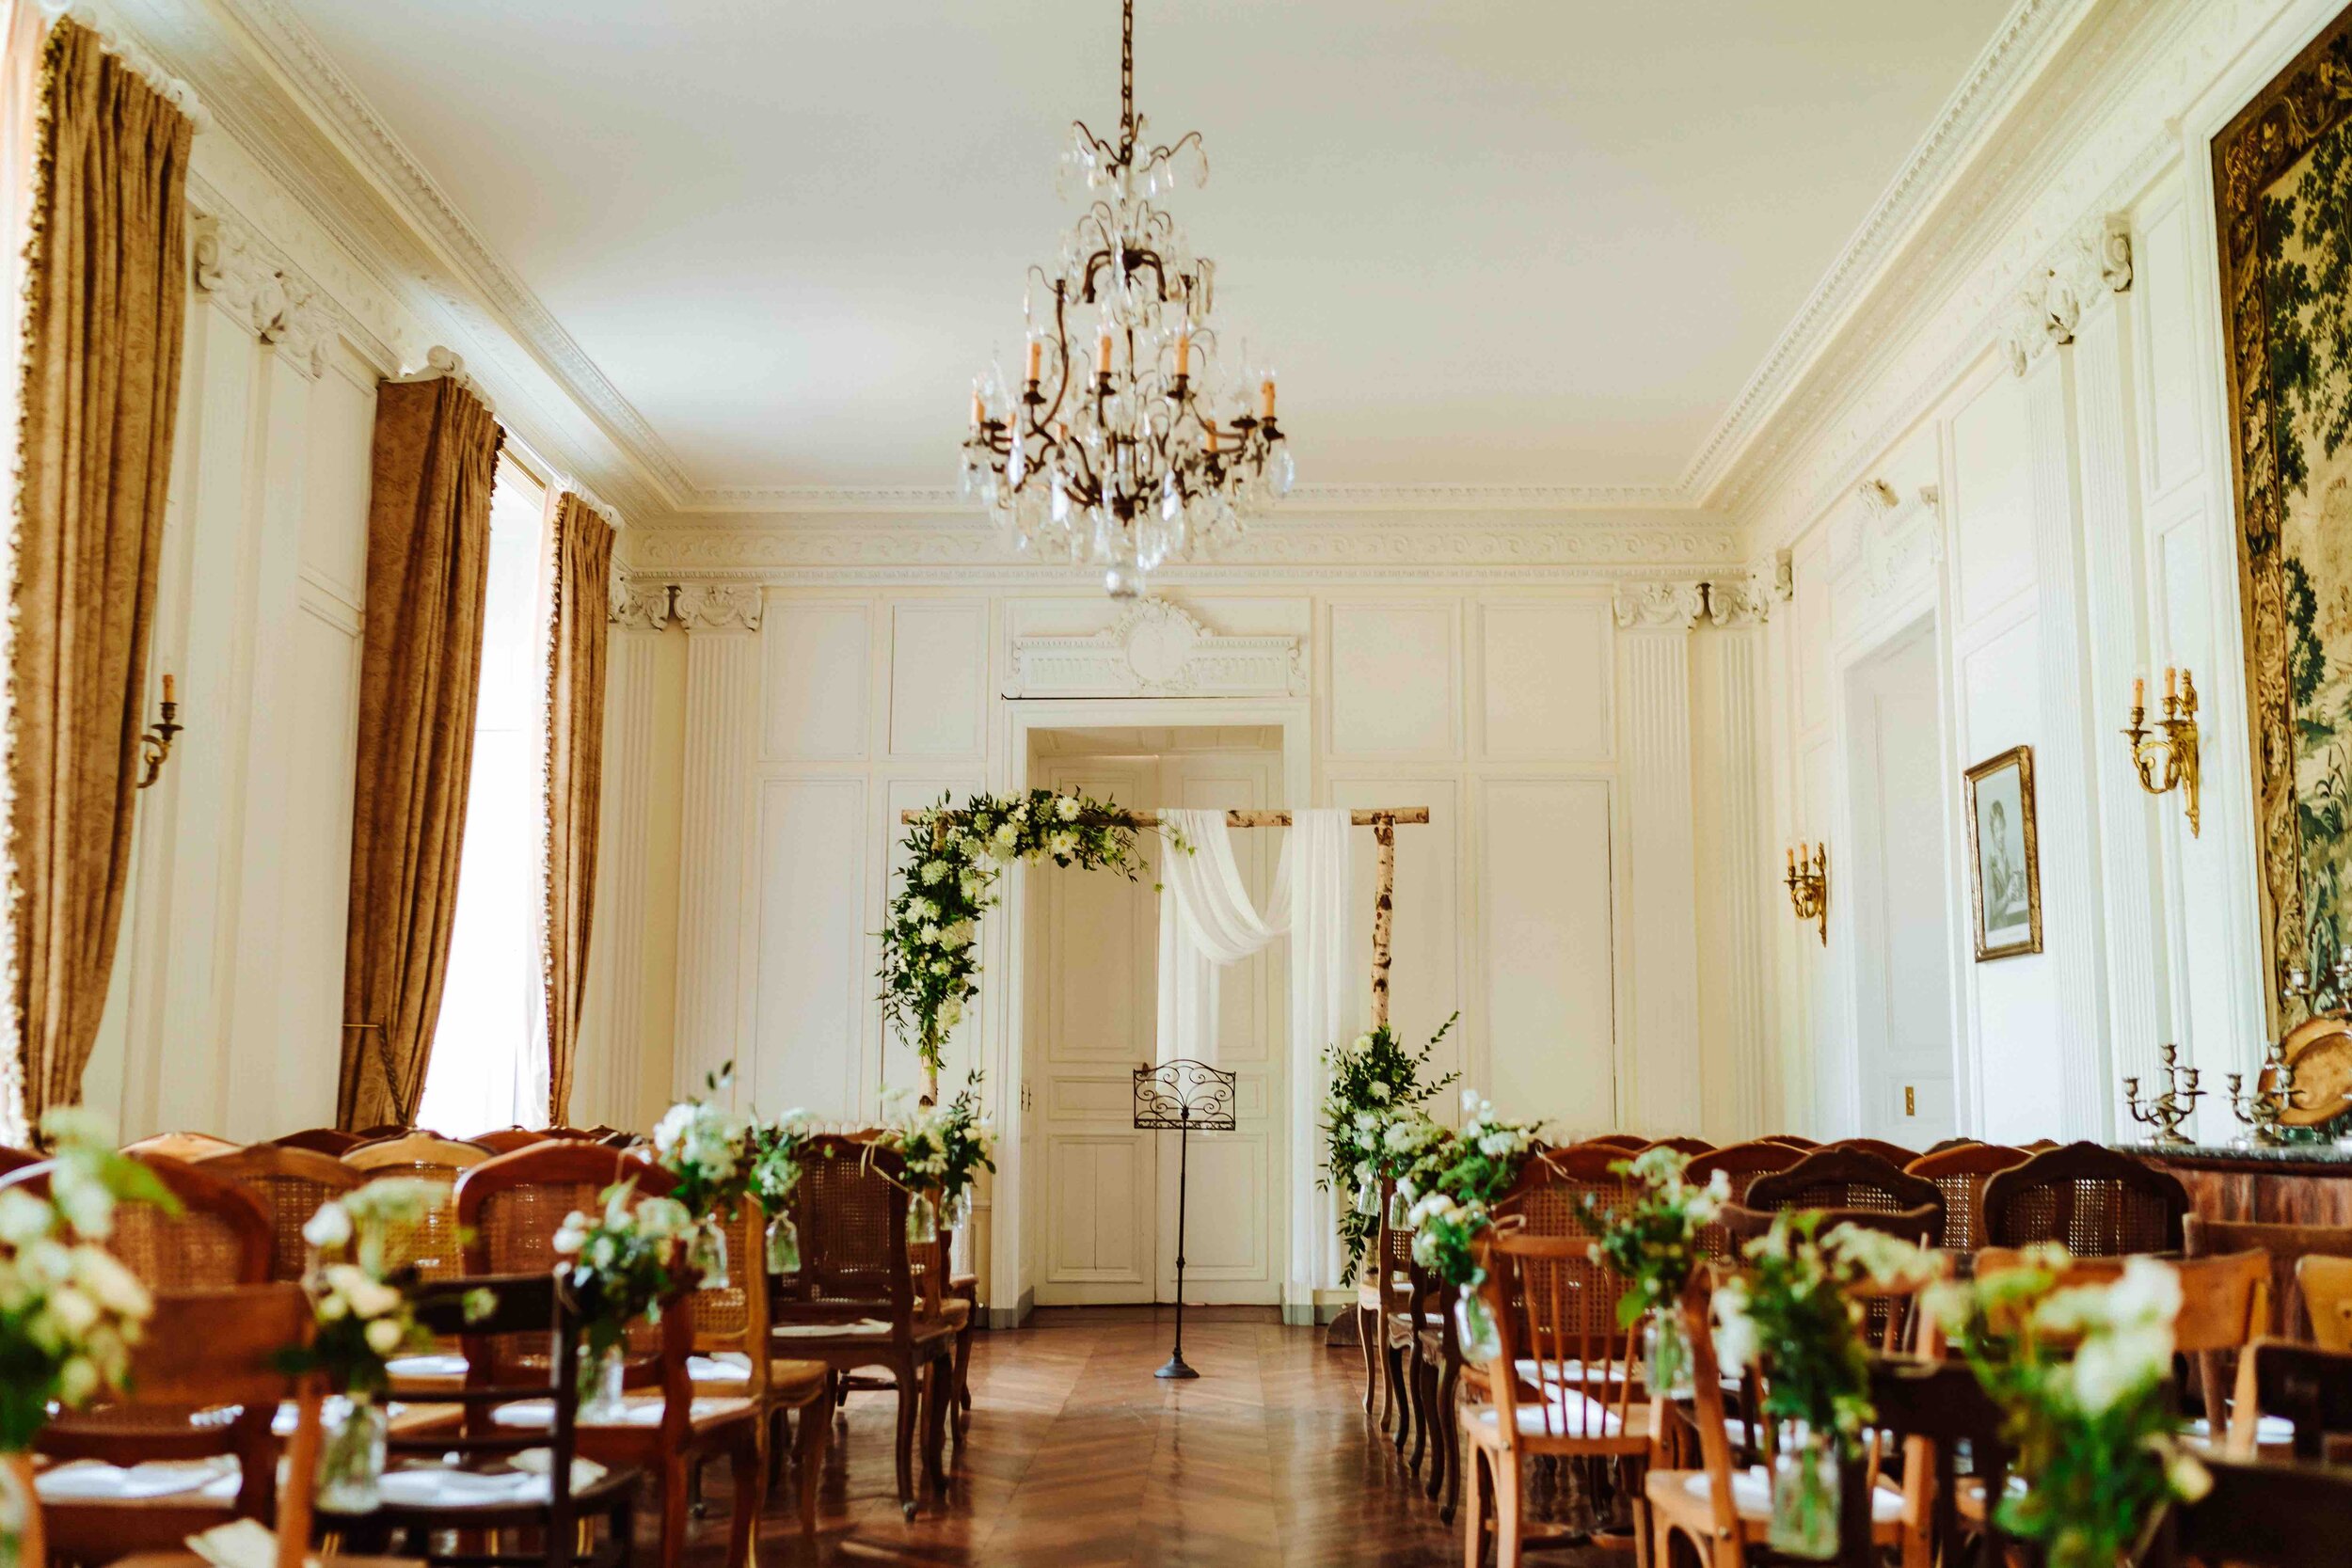 A room with a chandelier and stylish chairs decorated tastefully with flowers at a beautiful chateau wedding venue.